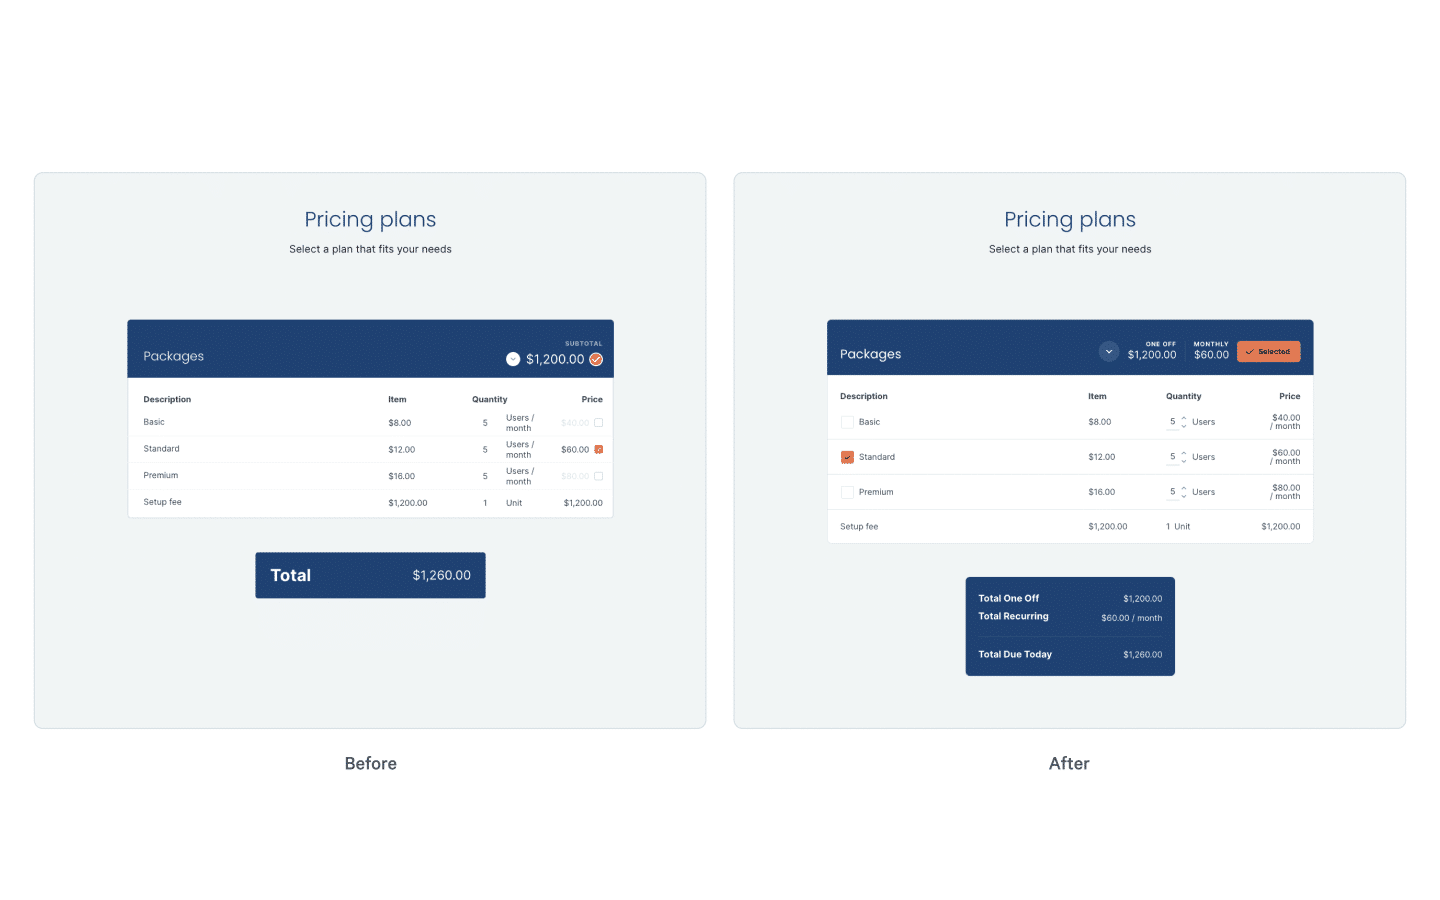 clearer pricing layout